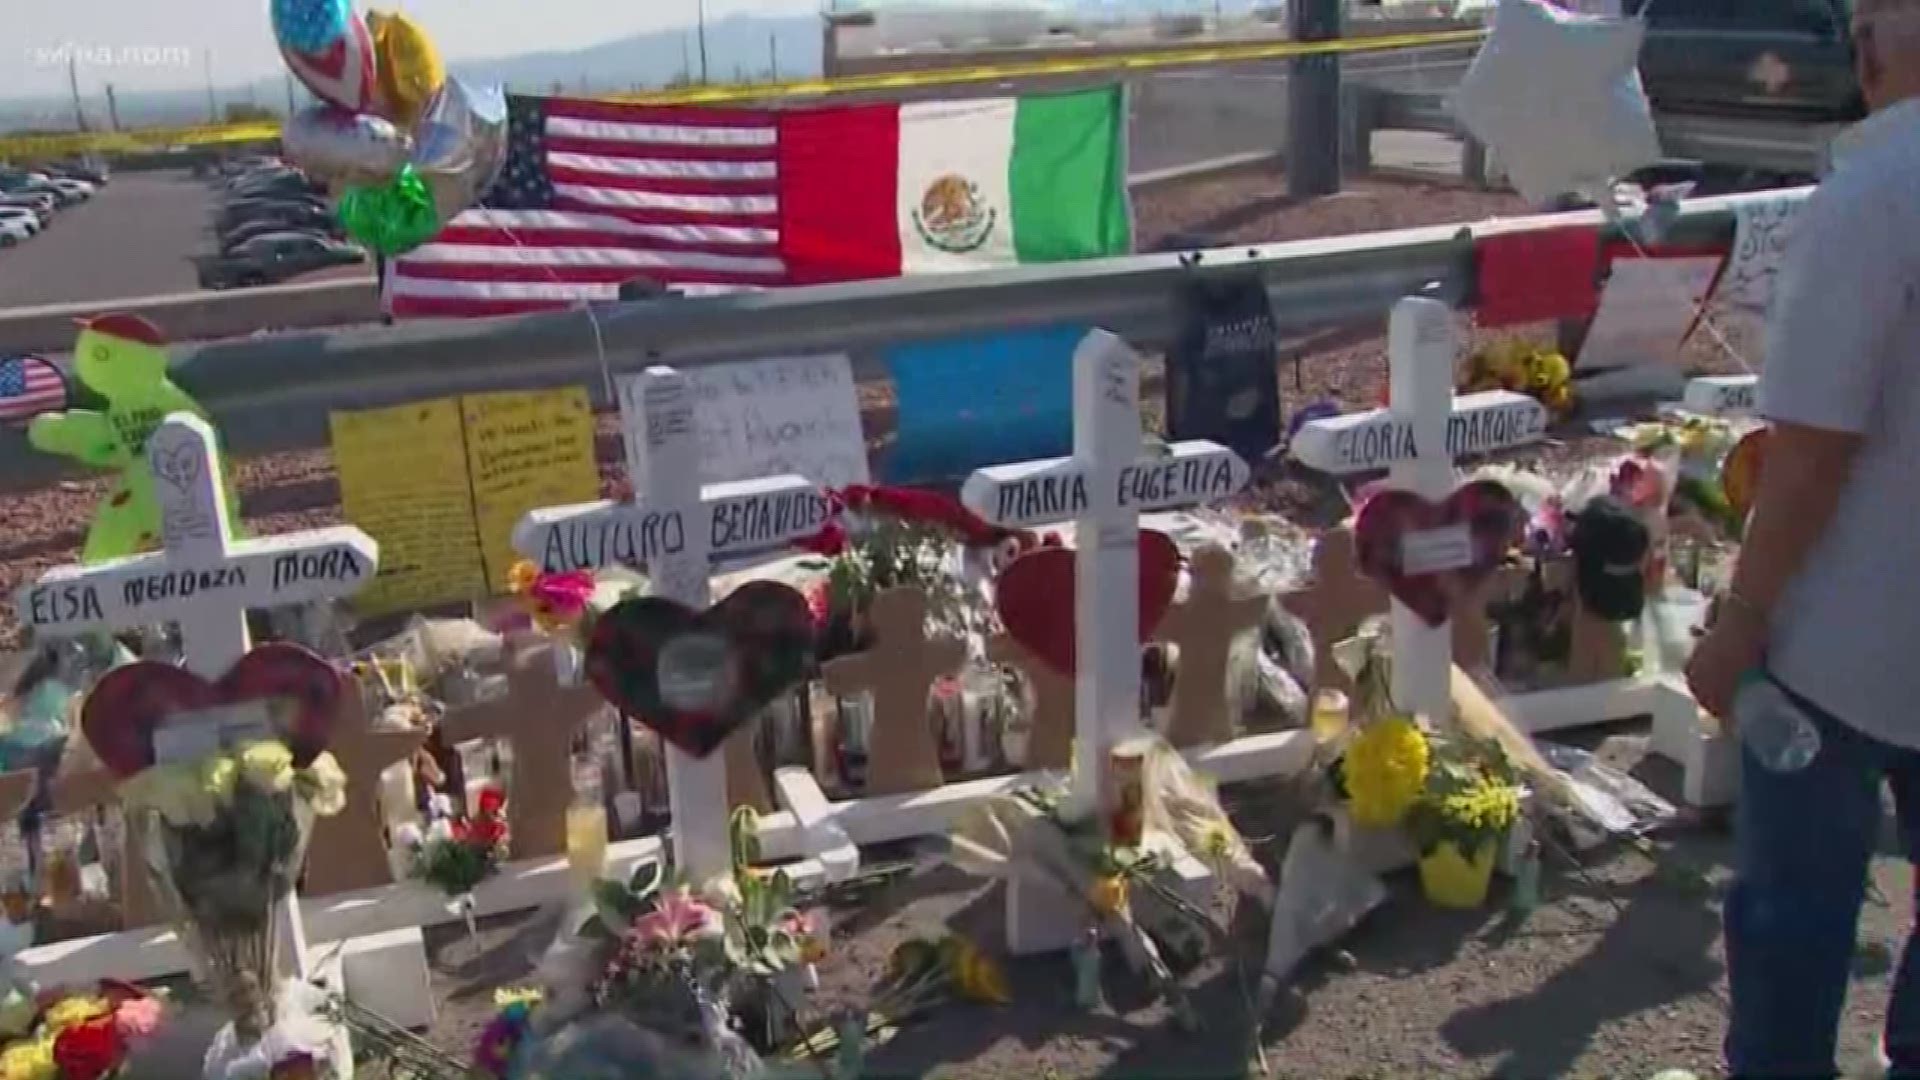 Many others are showing signs of support for El Paso, from donating blood to carving crosses.